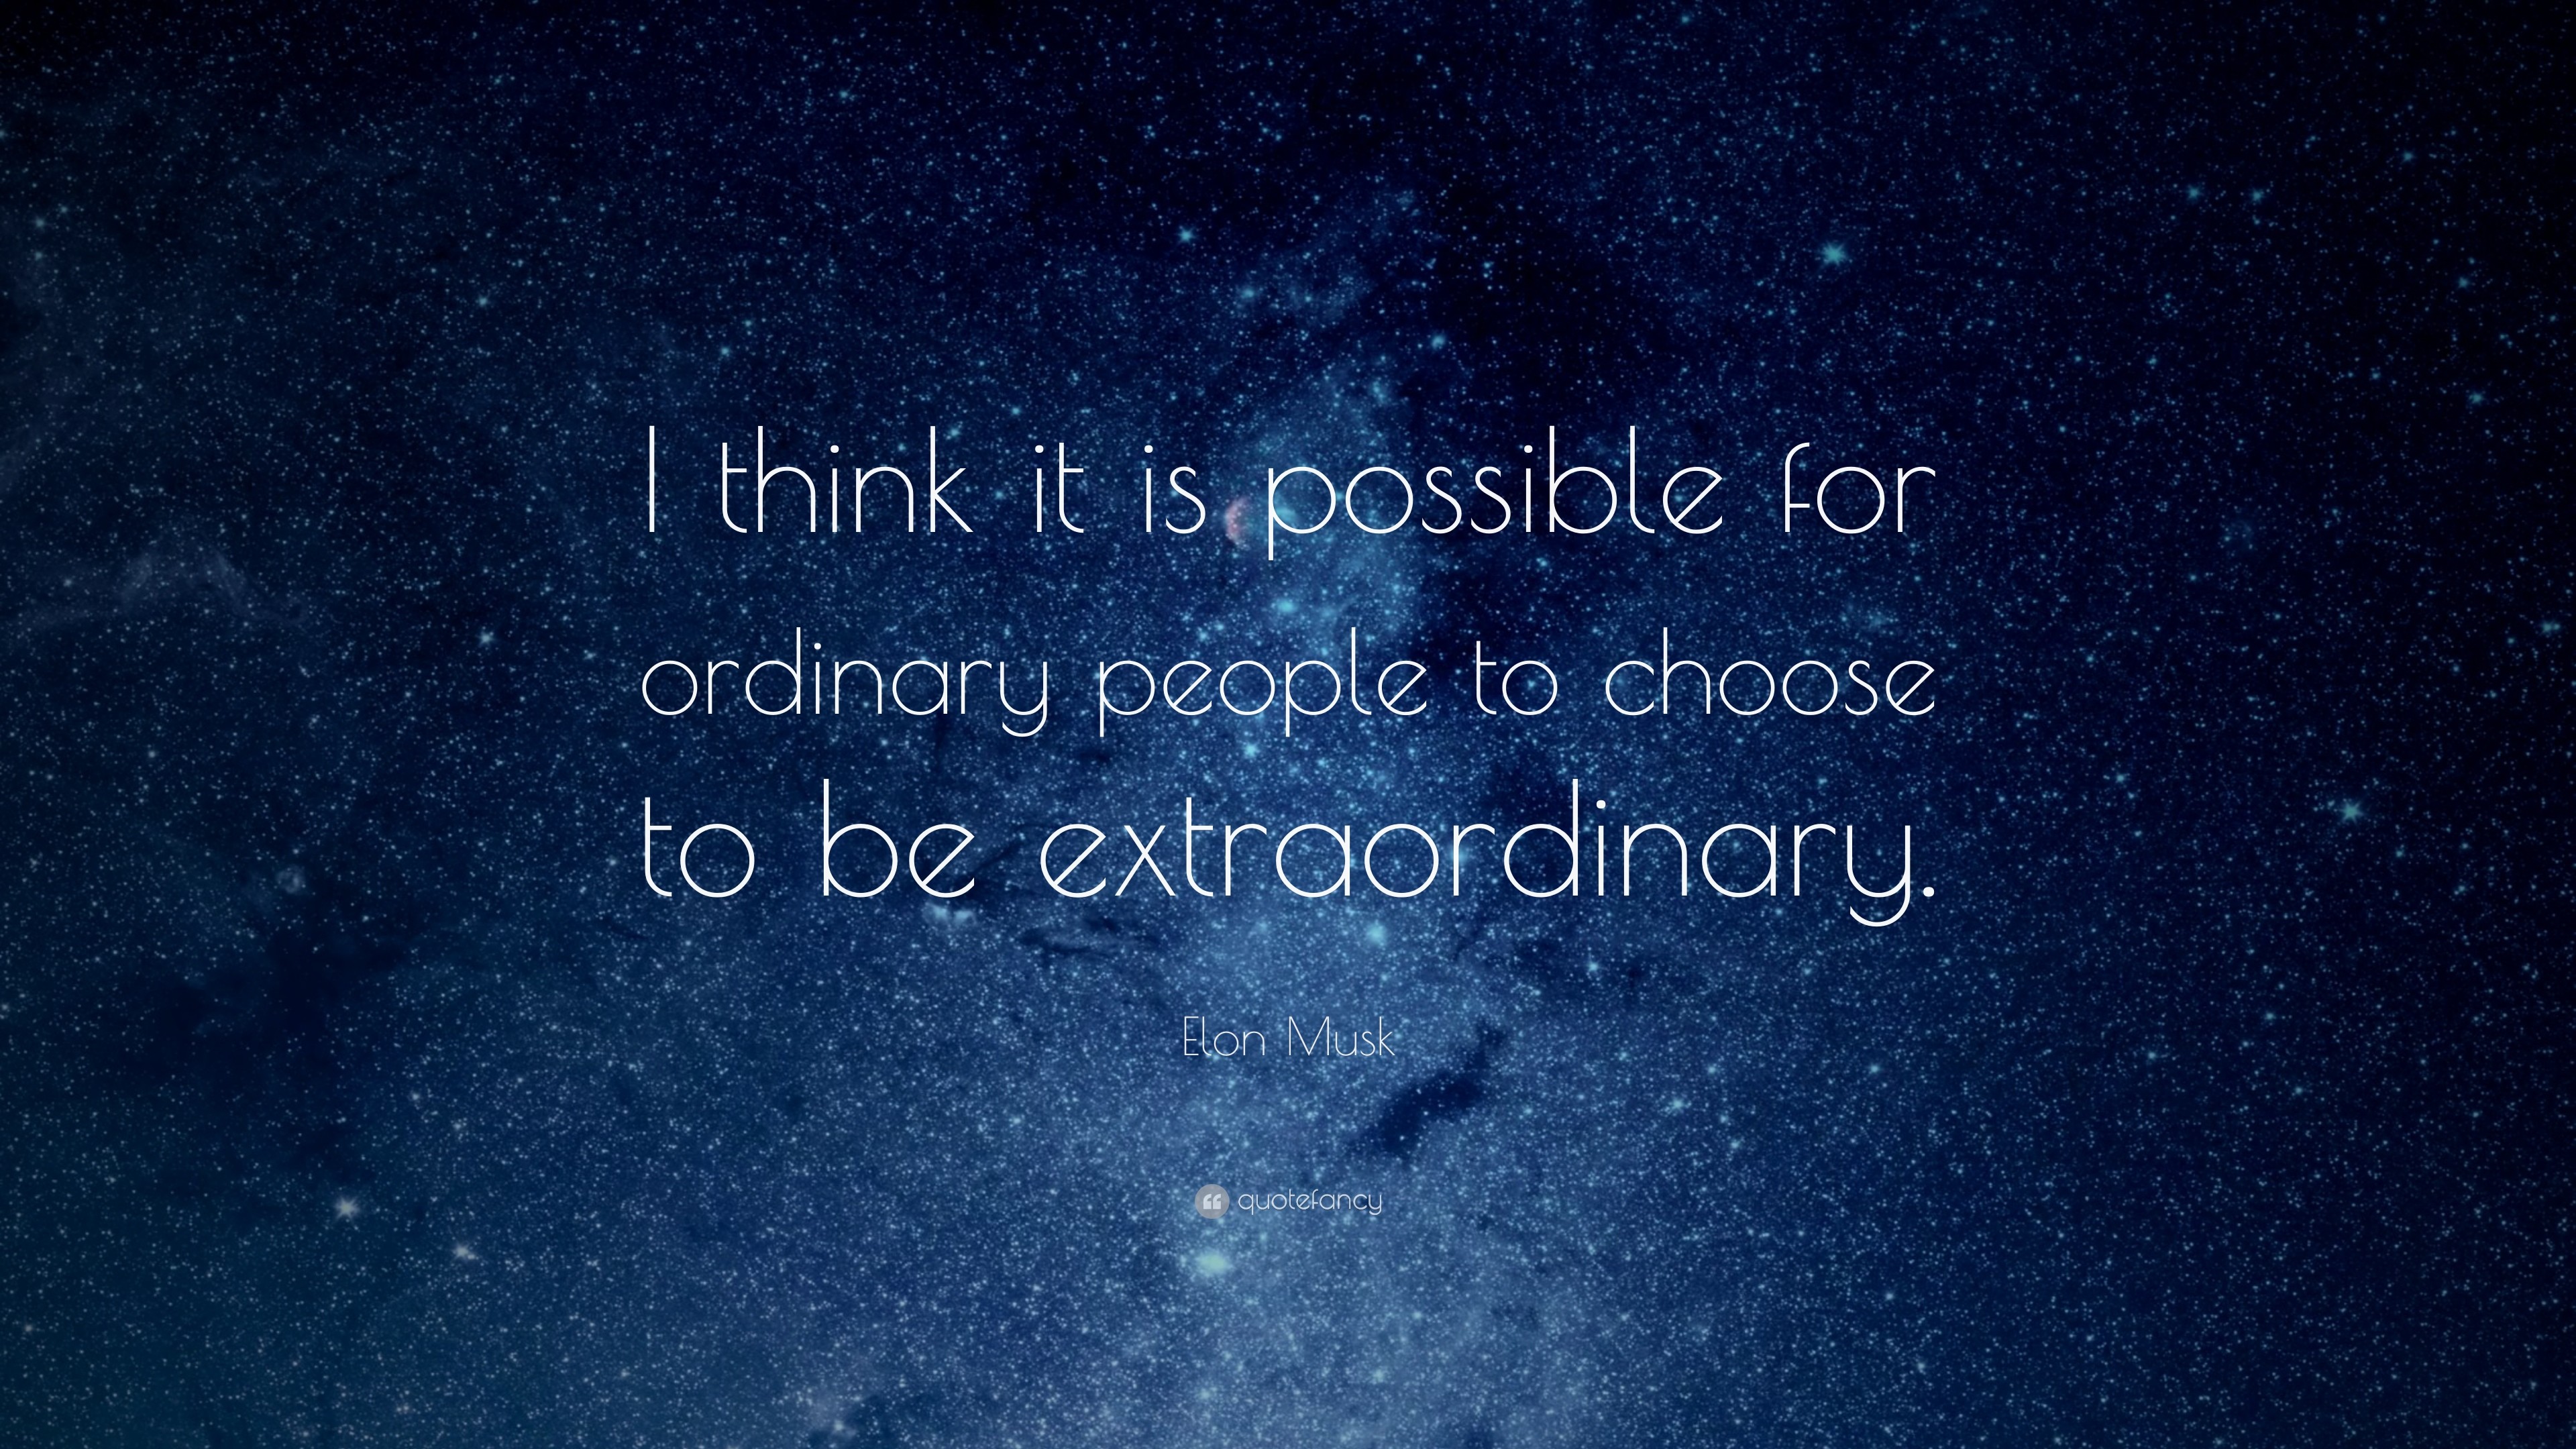 3840x2160 Elon Musk Quote: “I think it is possible for ordinary people to choose to